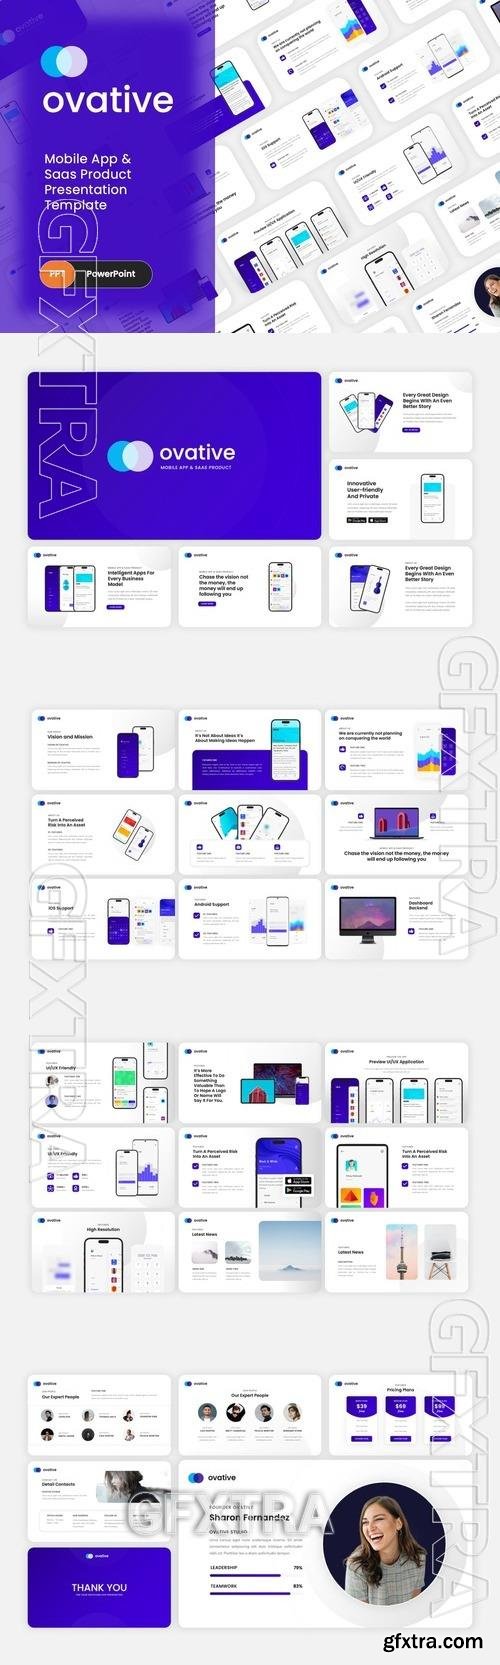 Ovative - Mobile Apps & SAAS PowerPoint Template 75WQNH2